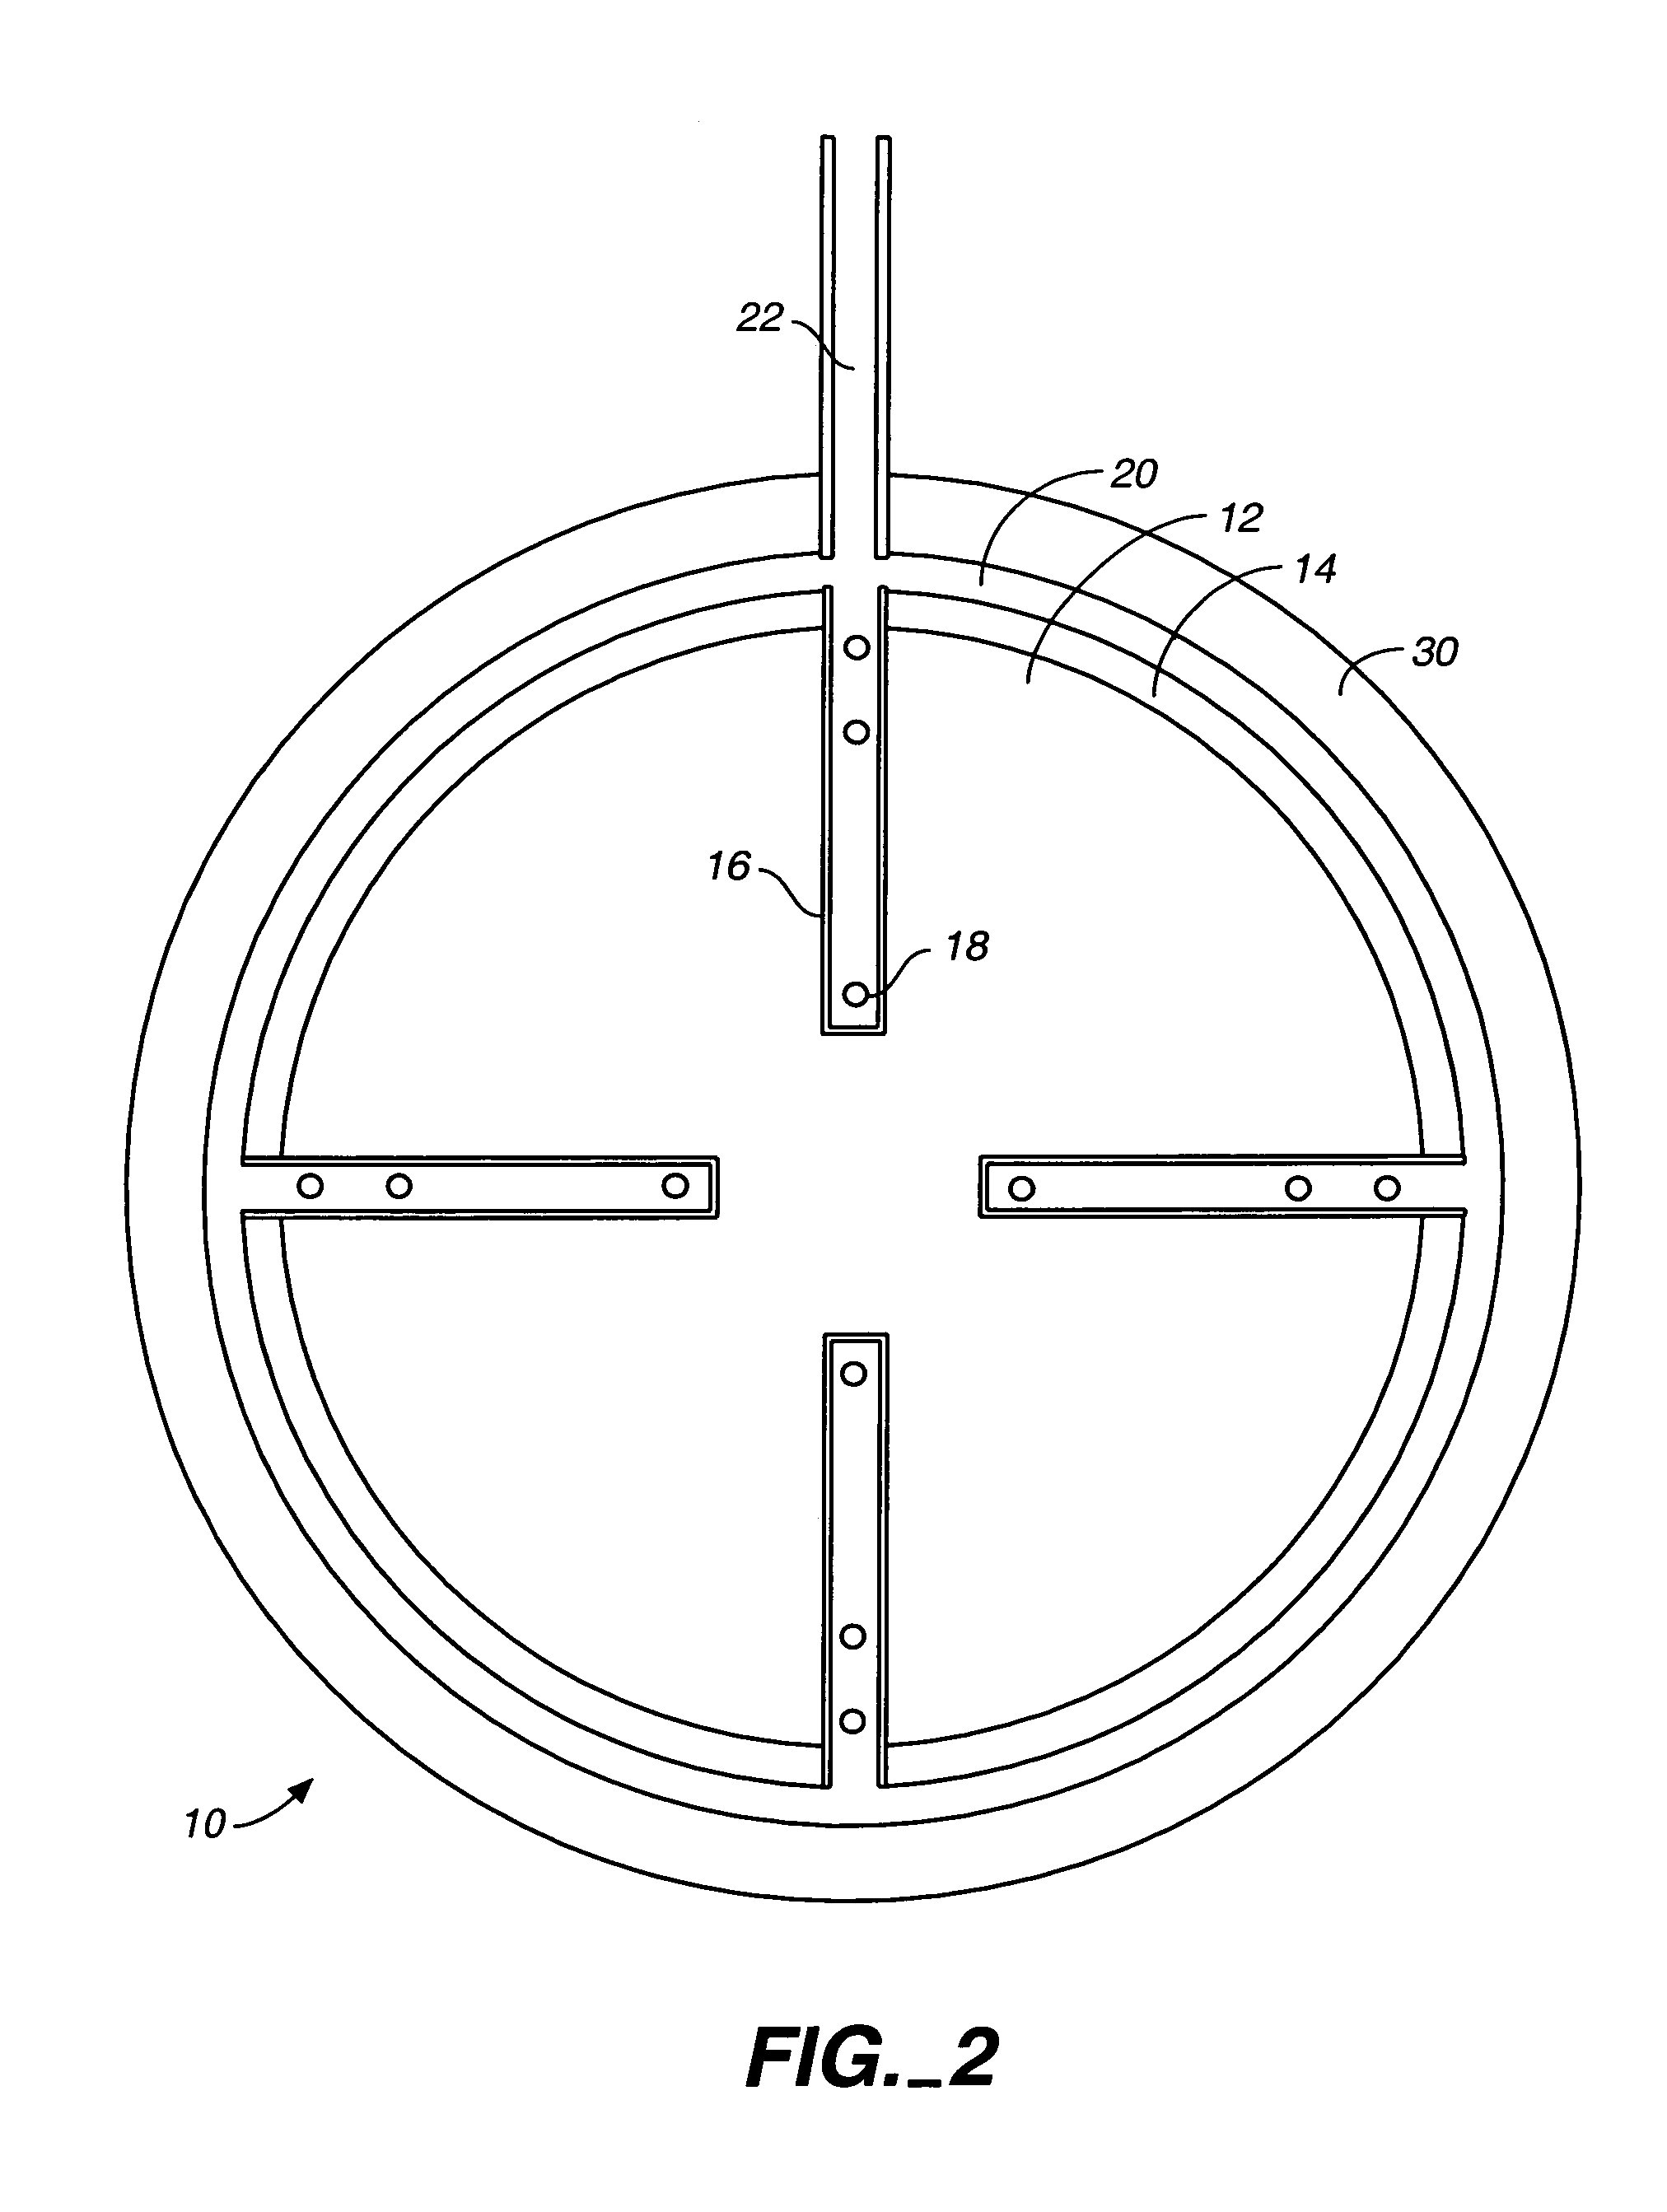 Method and apparatus for measurement of flow rate